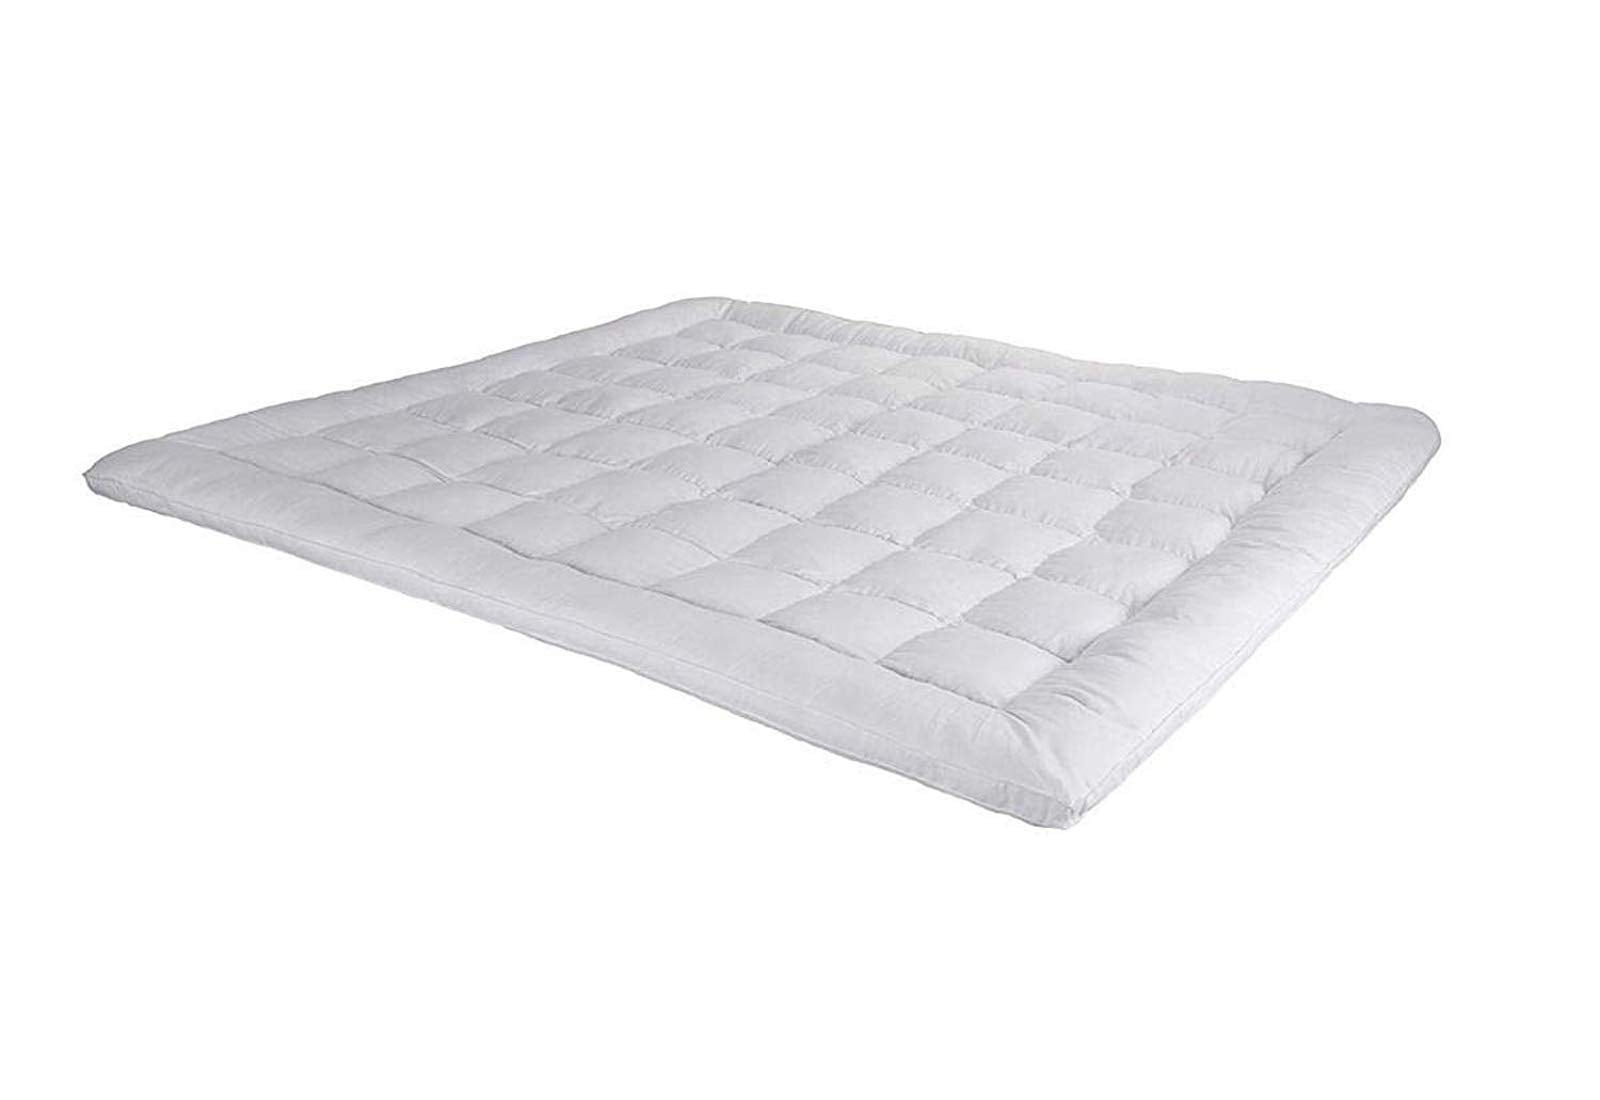 Kuber Industries Soft Microfibre 500 GSM Mattress Padding/Topper for Comfortable Sleep -White -6ft x 5ft - Queen (72x60inch)